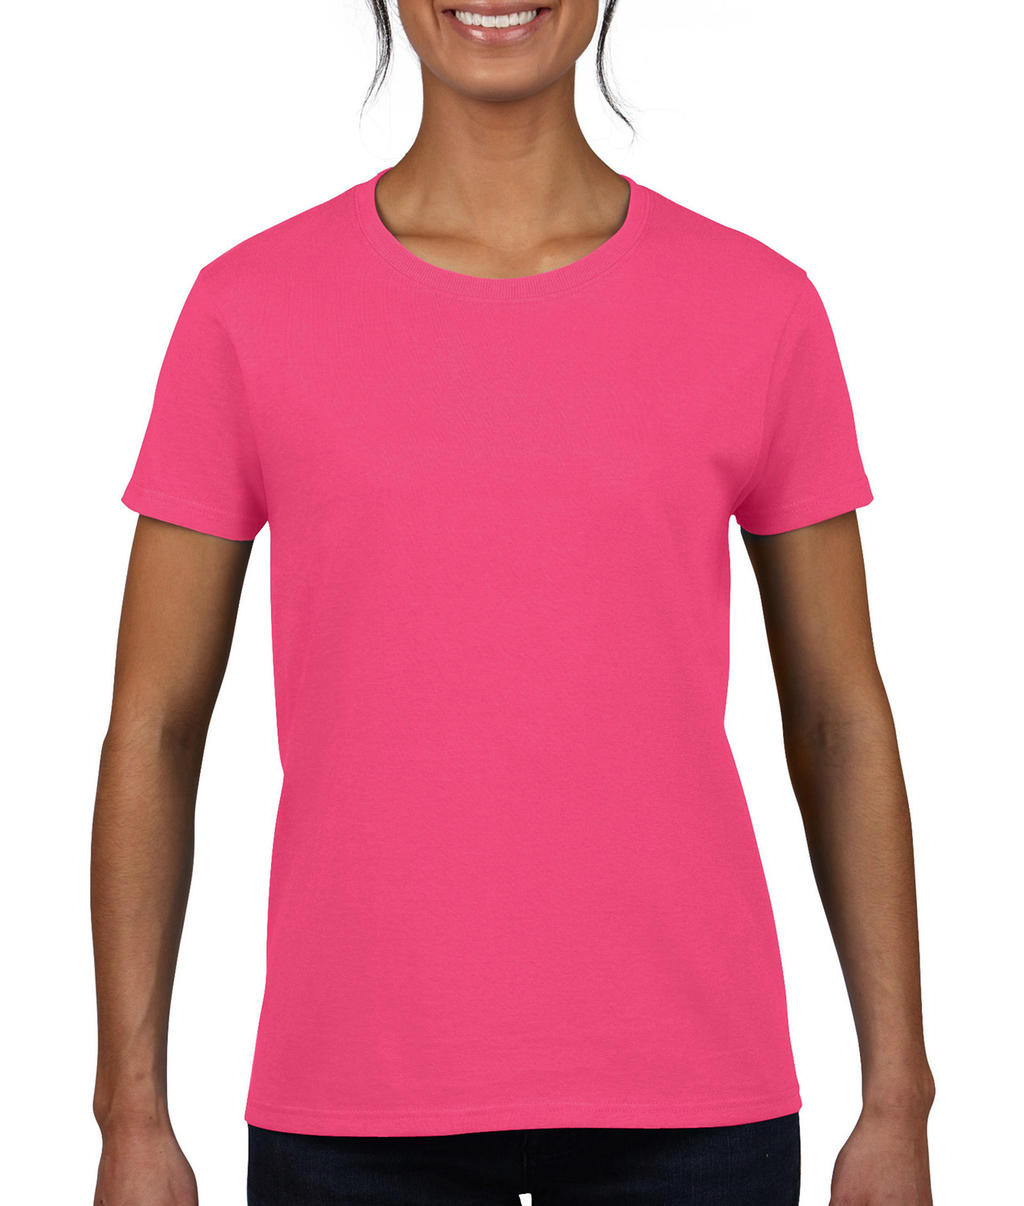  Ladies Heavy Cotton T-Shirt in Farbe Safety Pink